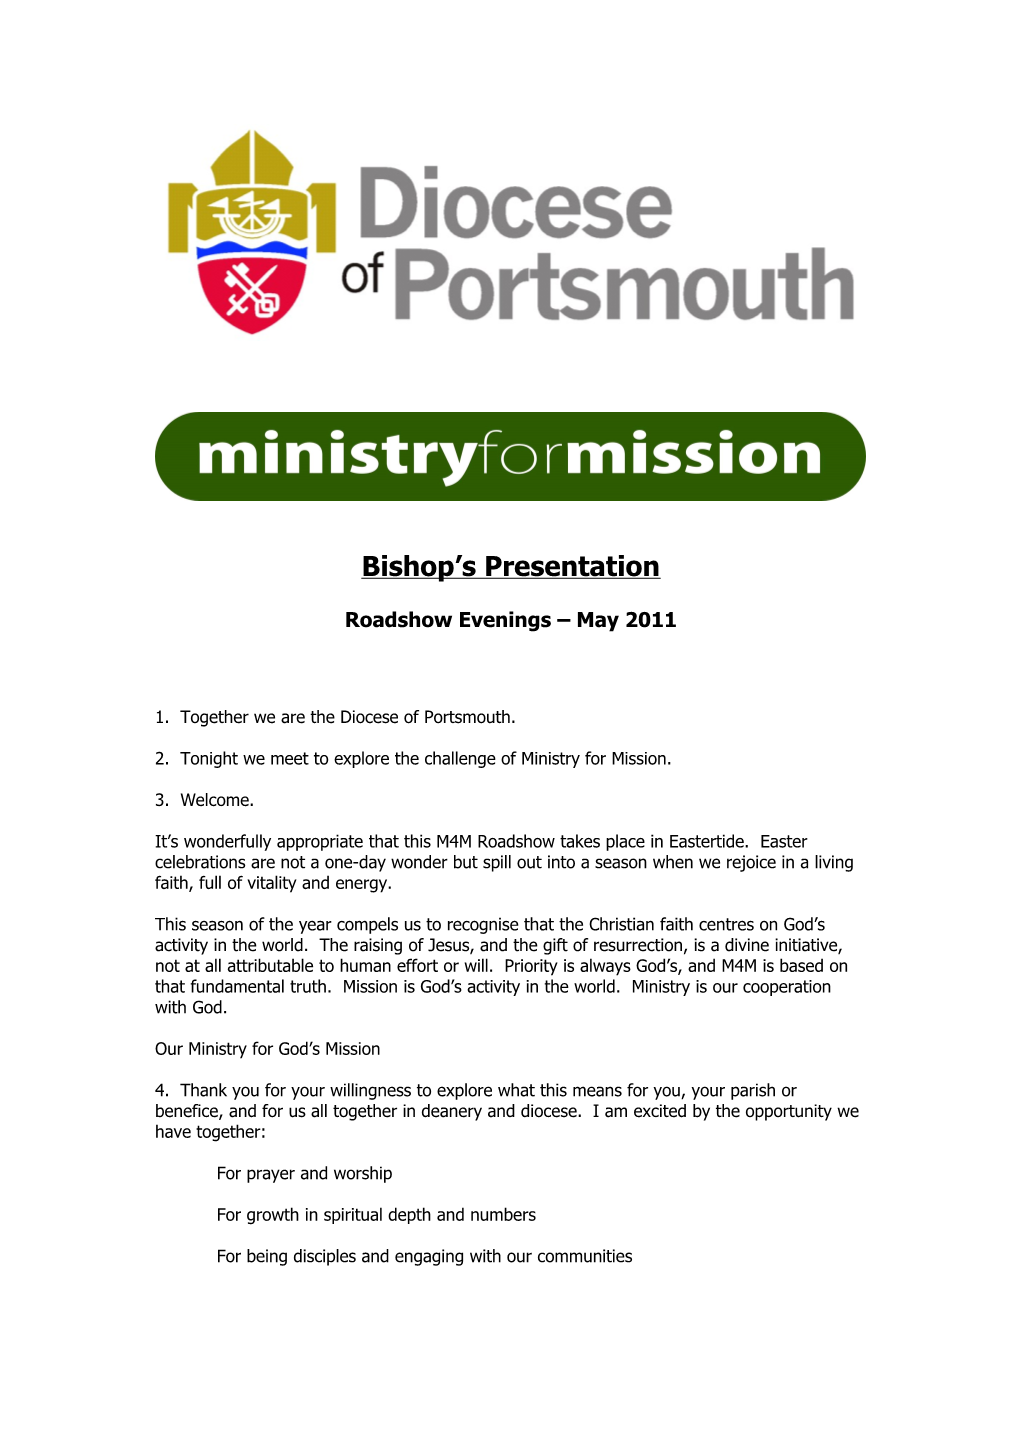 Ministry for Mission Roadshow